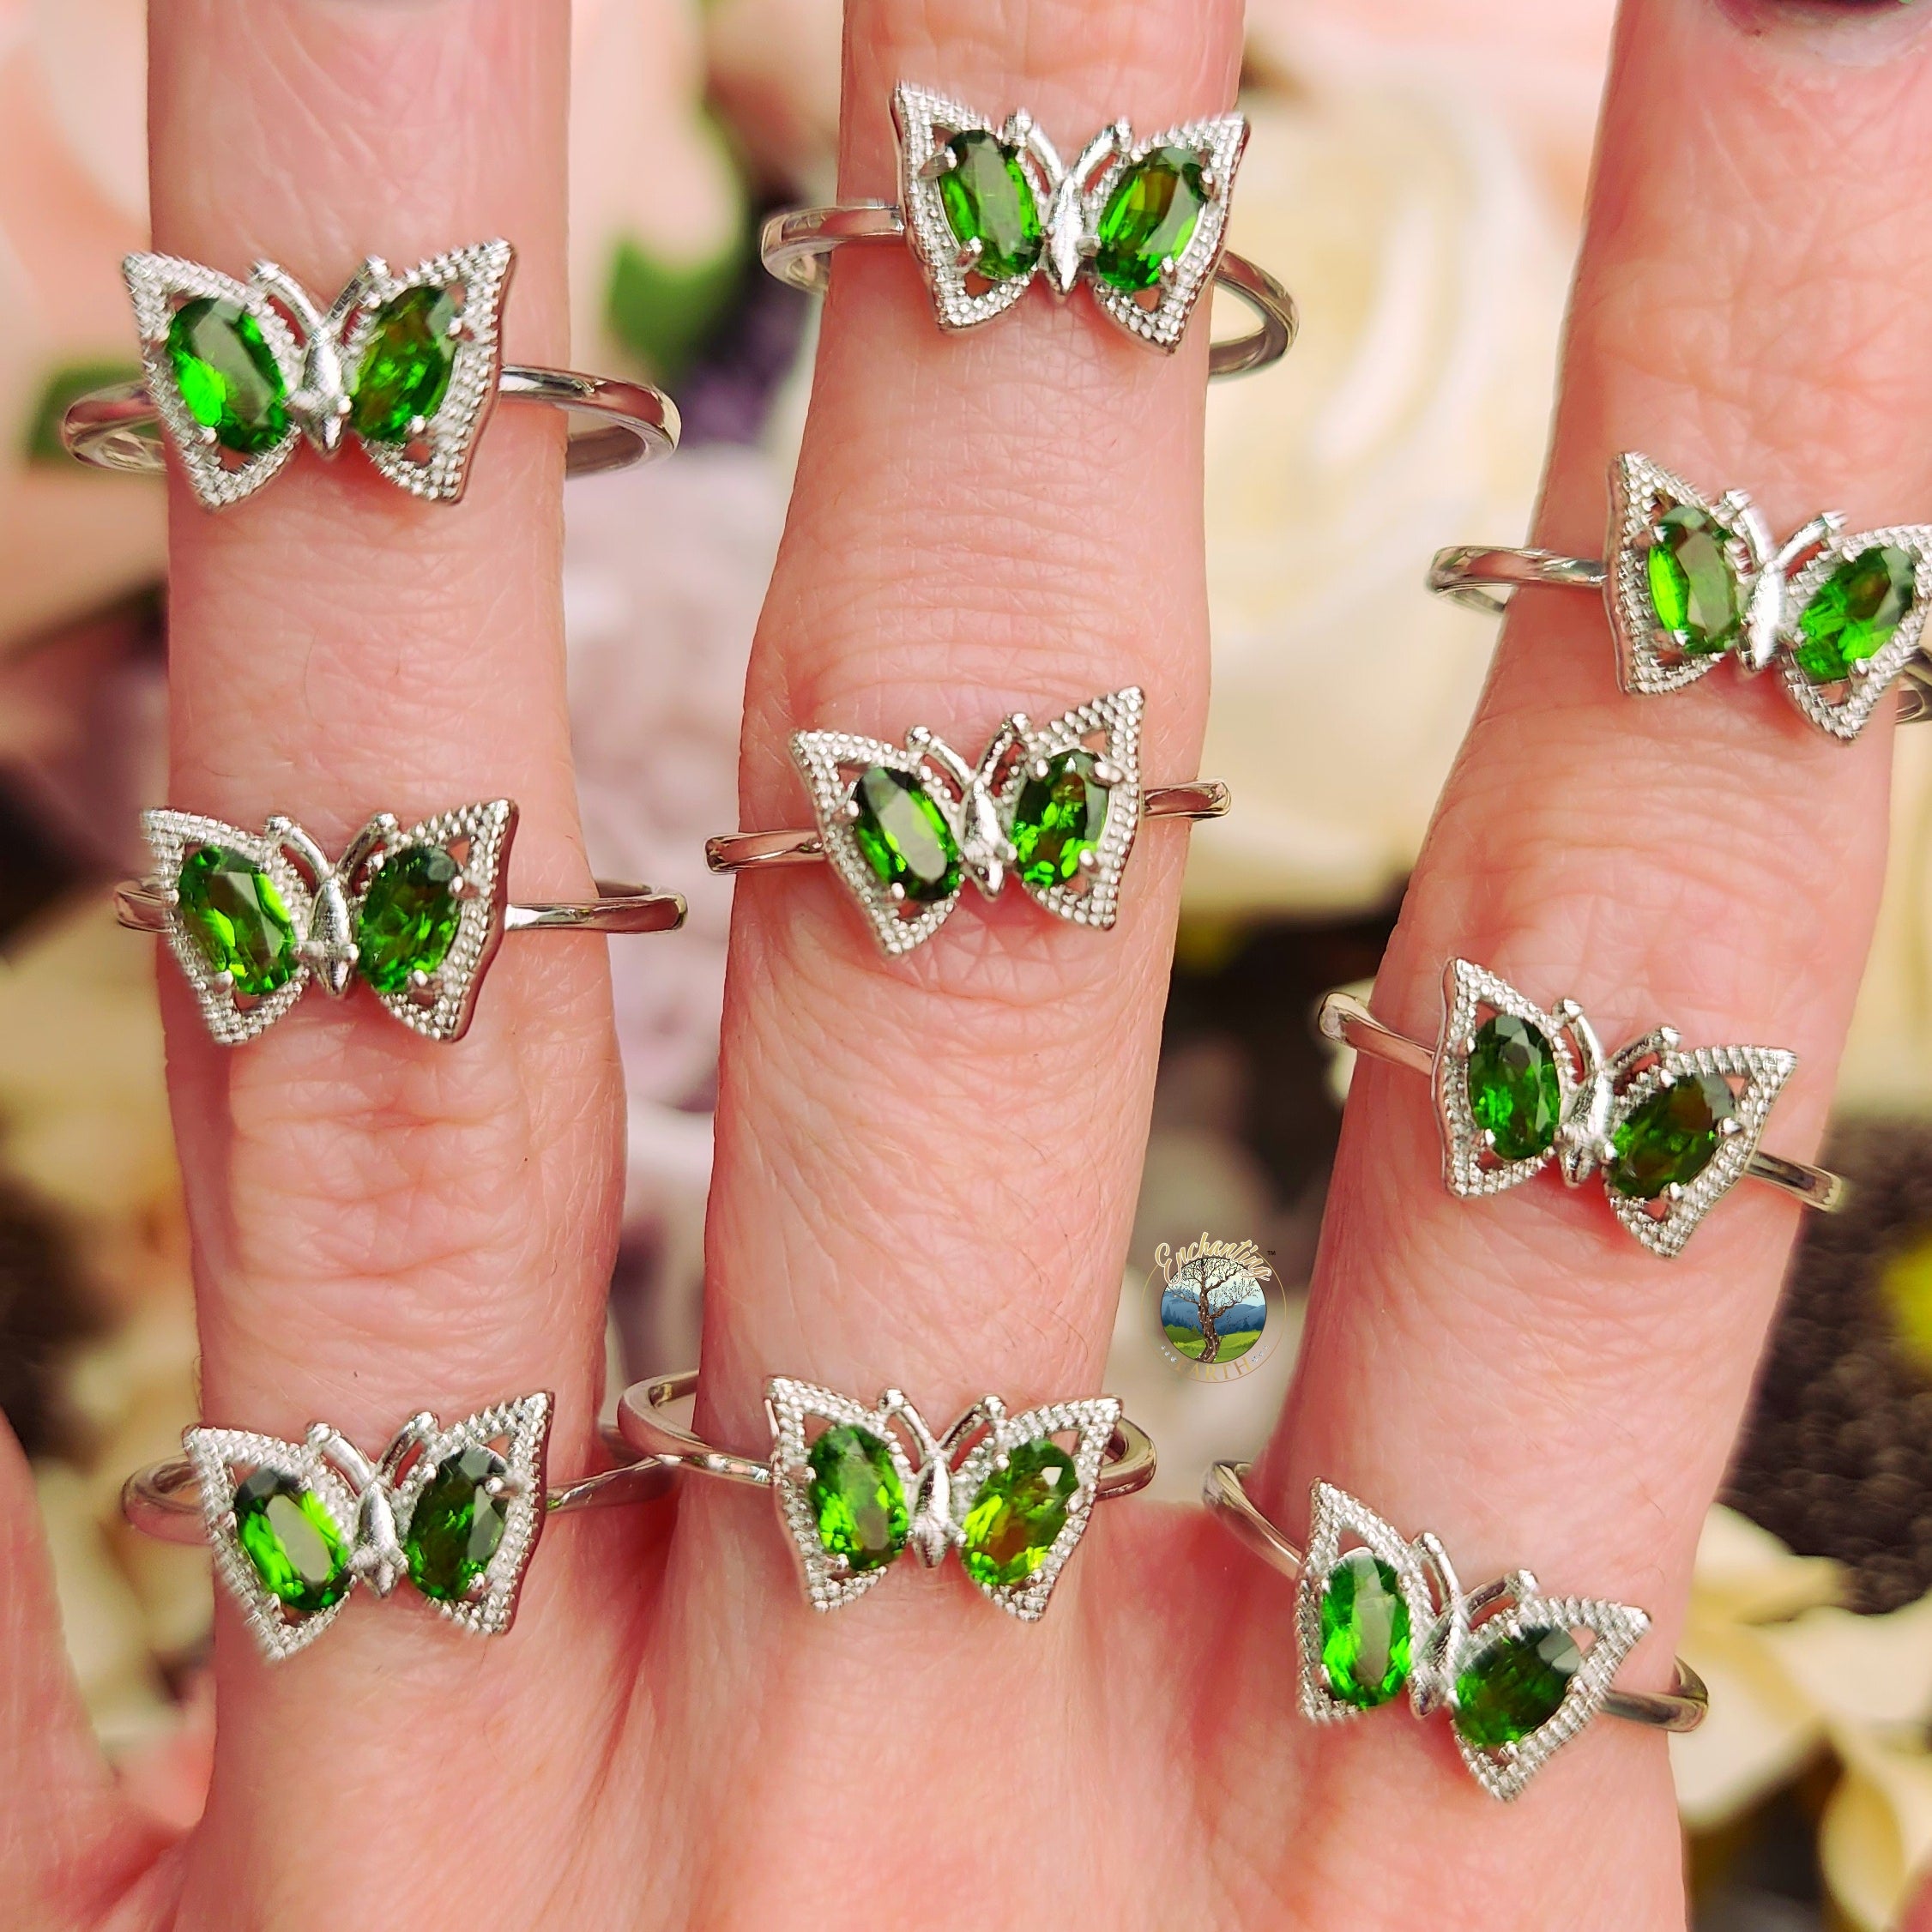 Chrome Diopside Butterfly Adjustable Ring .925 Silver for Forgiveness and Healing for Broken Hearts